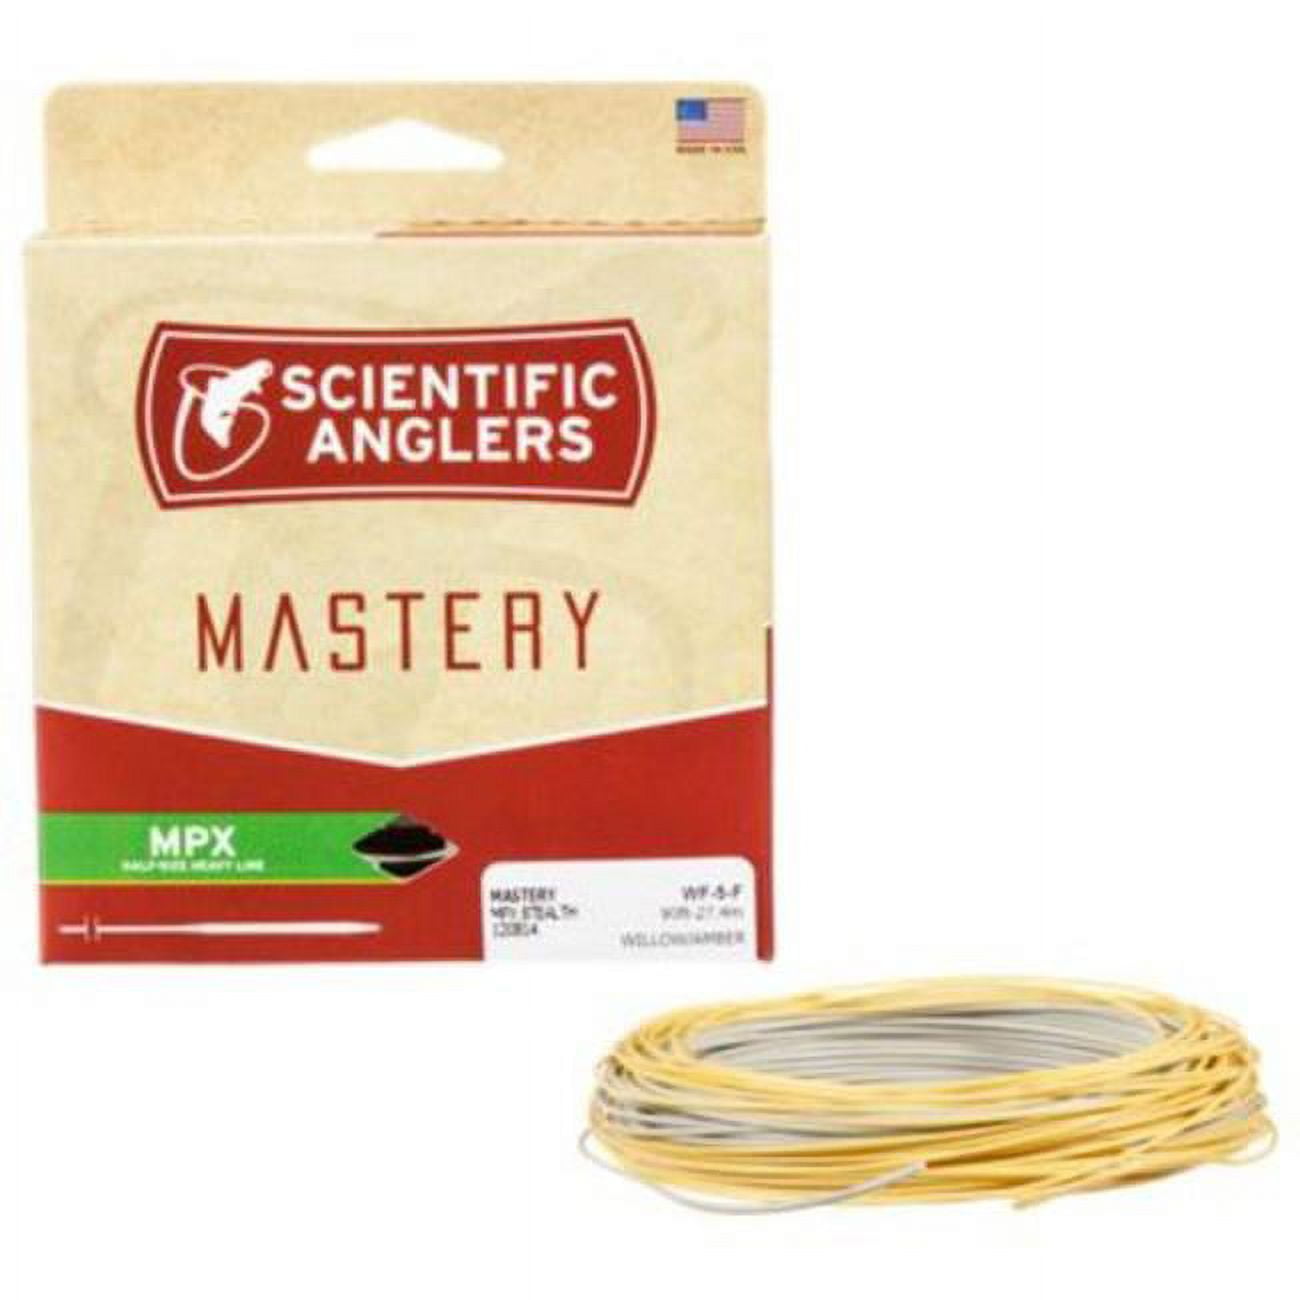 Scientific Anglers 666936 Mastery MPX Taper Floating WF Fly Line, Amber  & Willow 